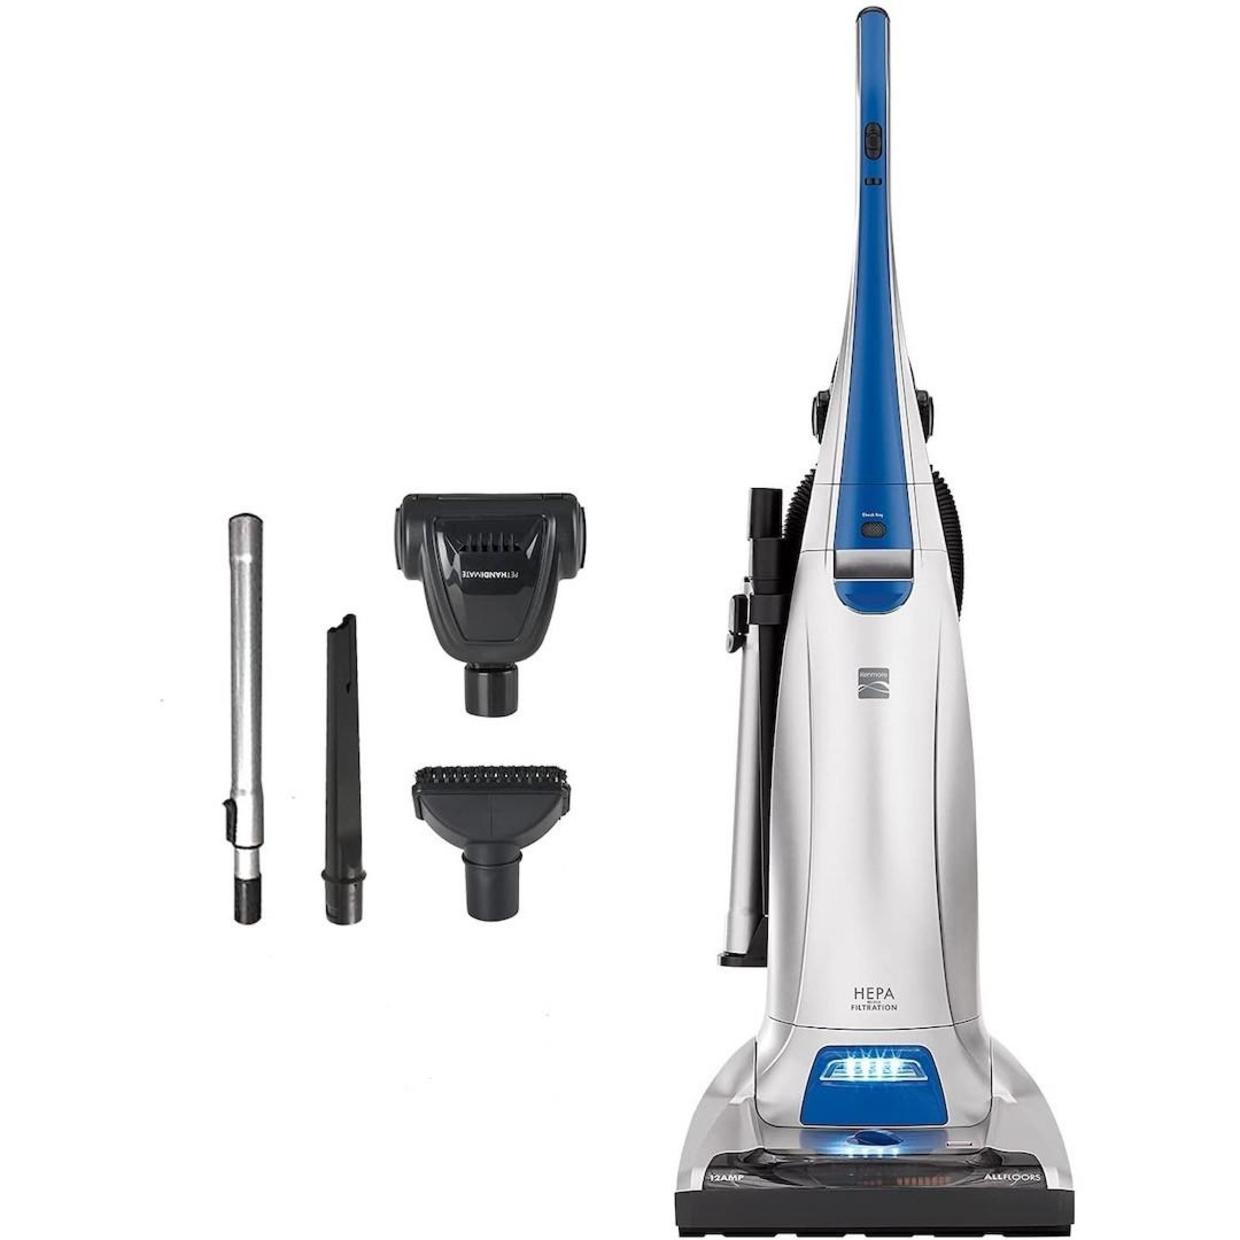 The best rated upright vacuums, stick vacuums, robot vacuums and mop